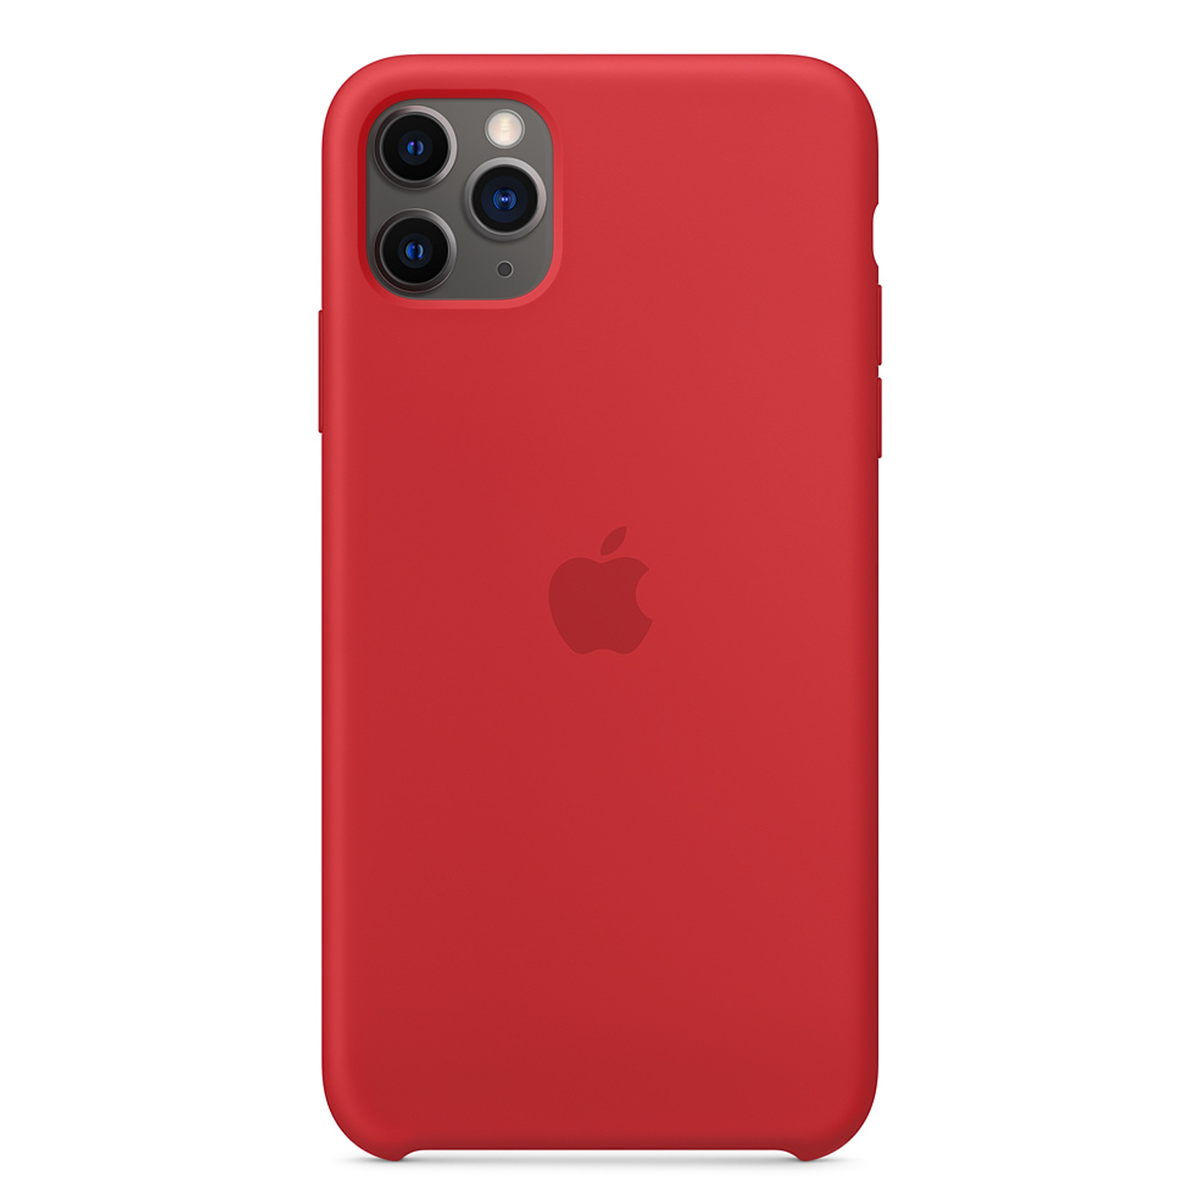 iPhone 11 Pro Max Silicone Case Red